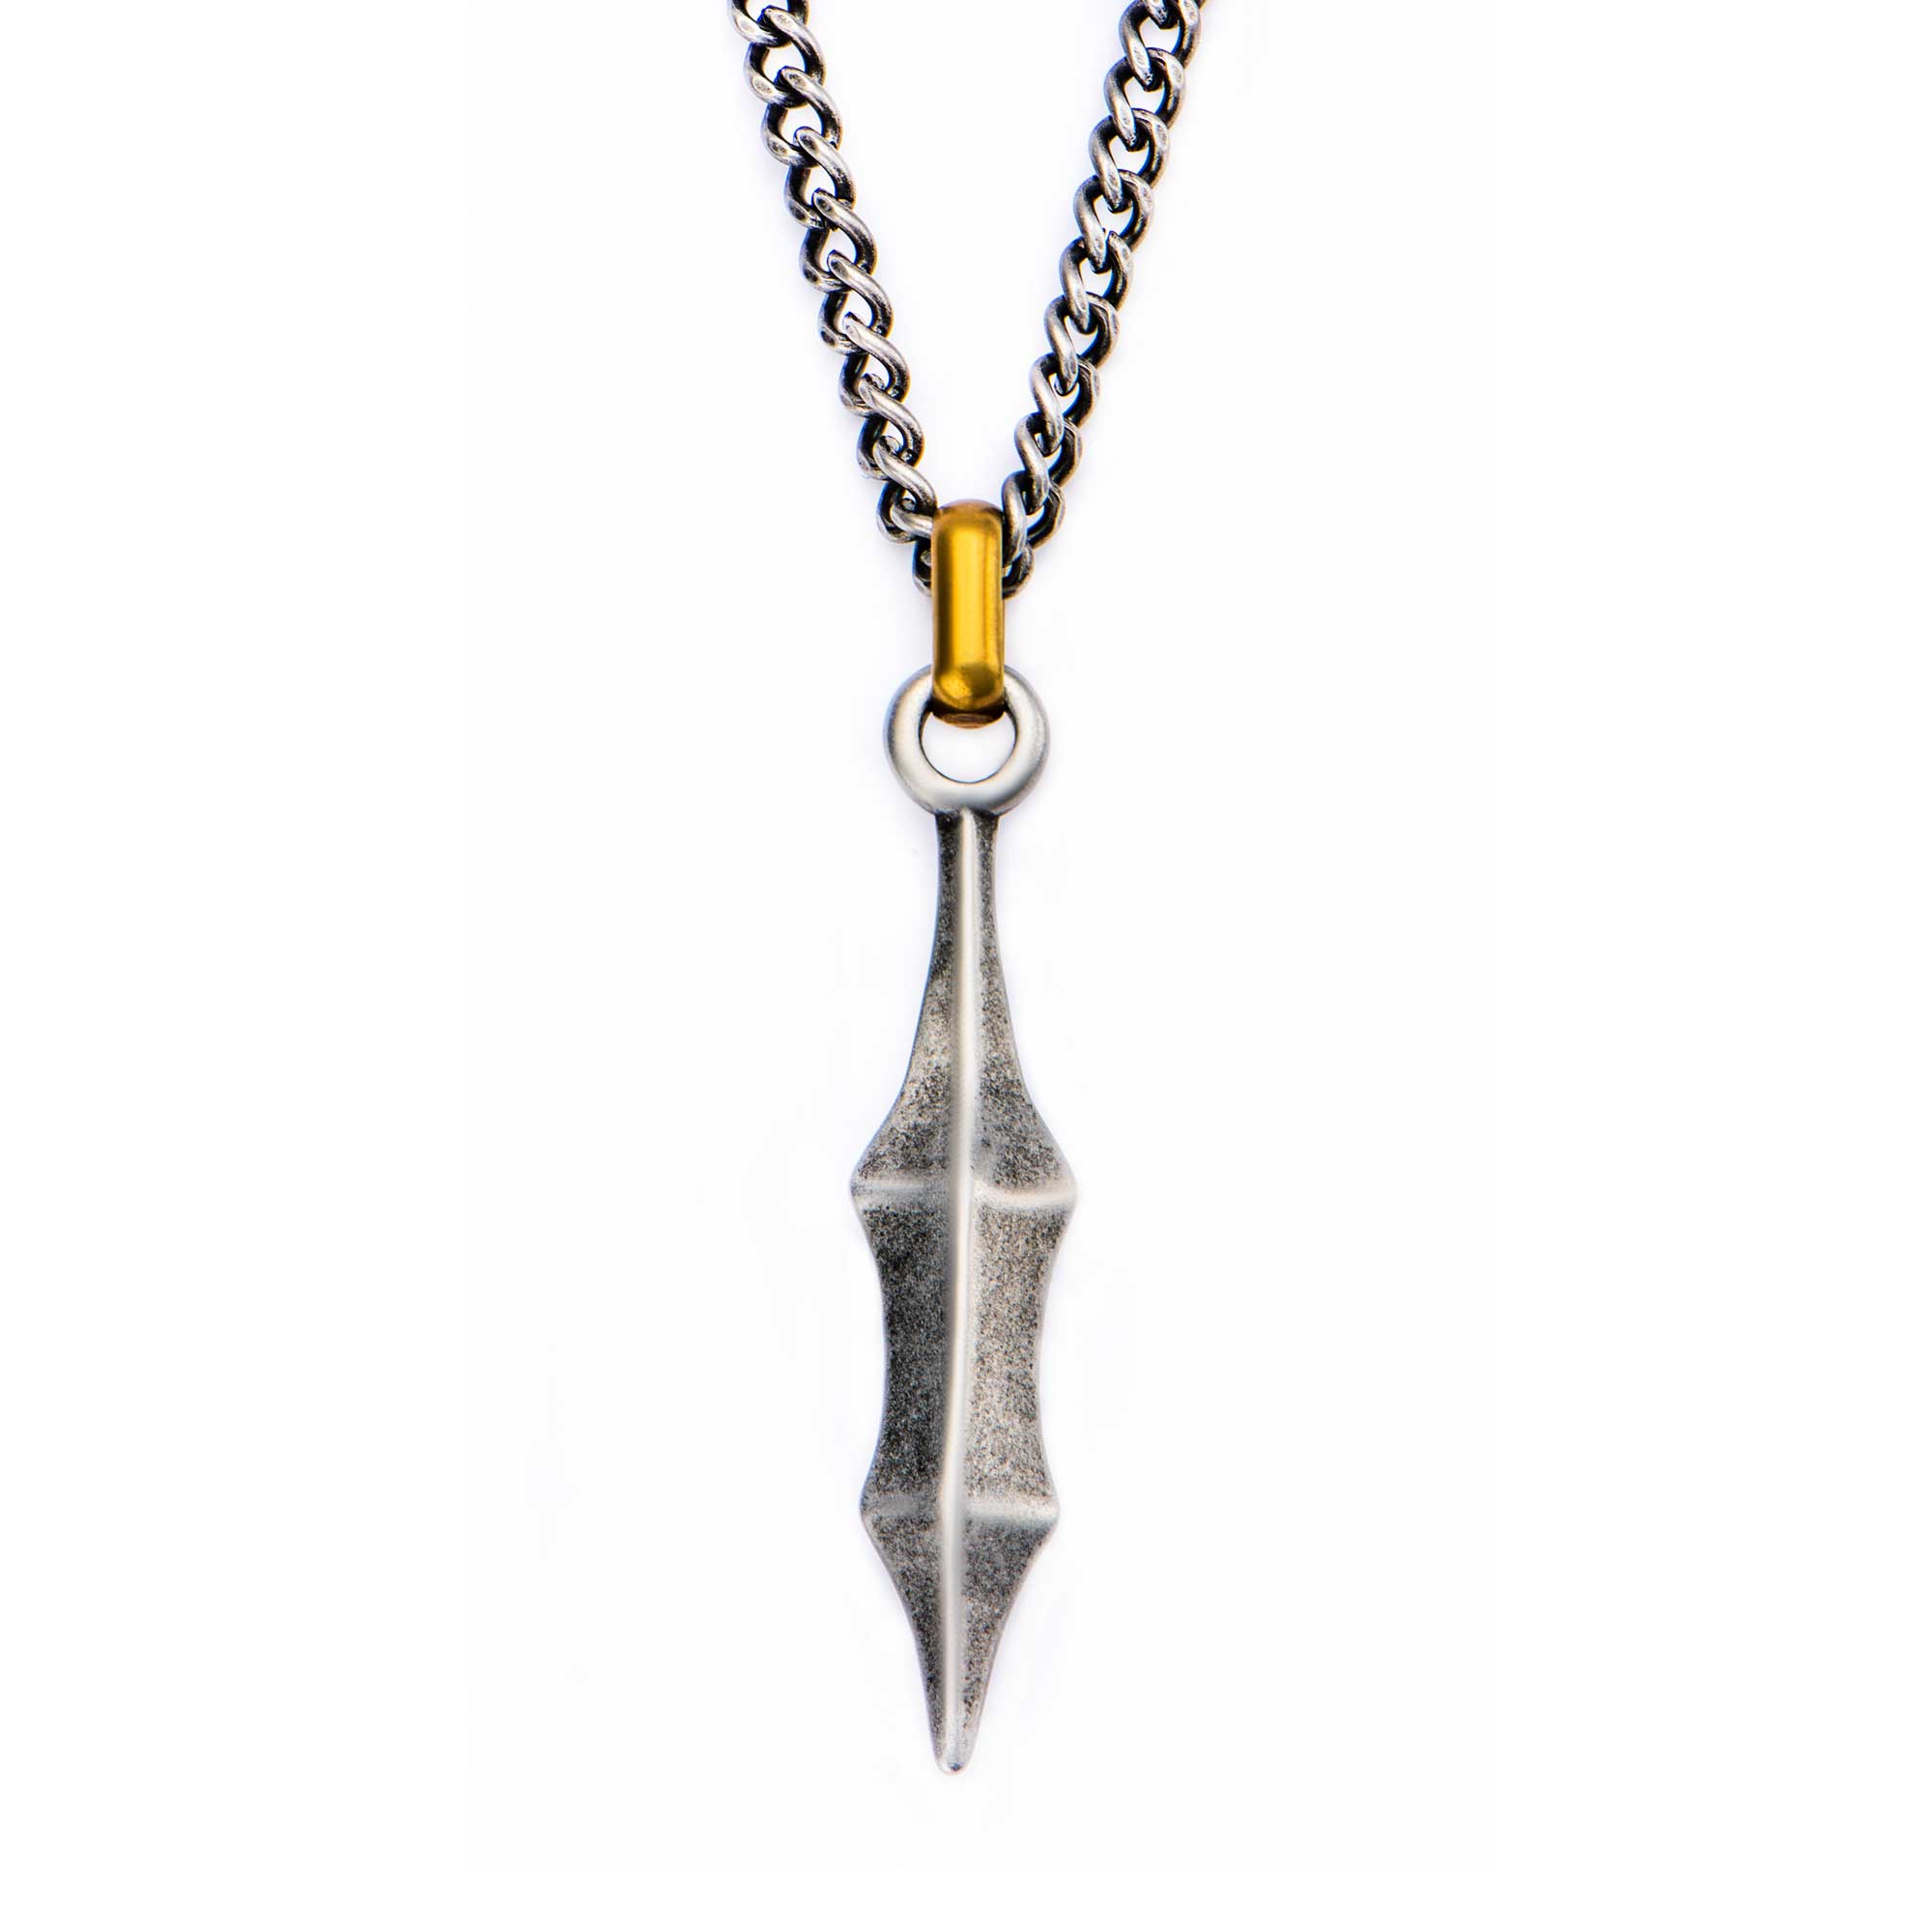 Antique Finish with an Antiqued Gold Plated Bail Medieval Blade Pendant Thurber's Fine Jewelry Wadsworth, OH